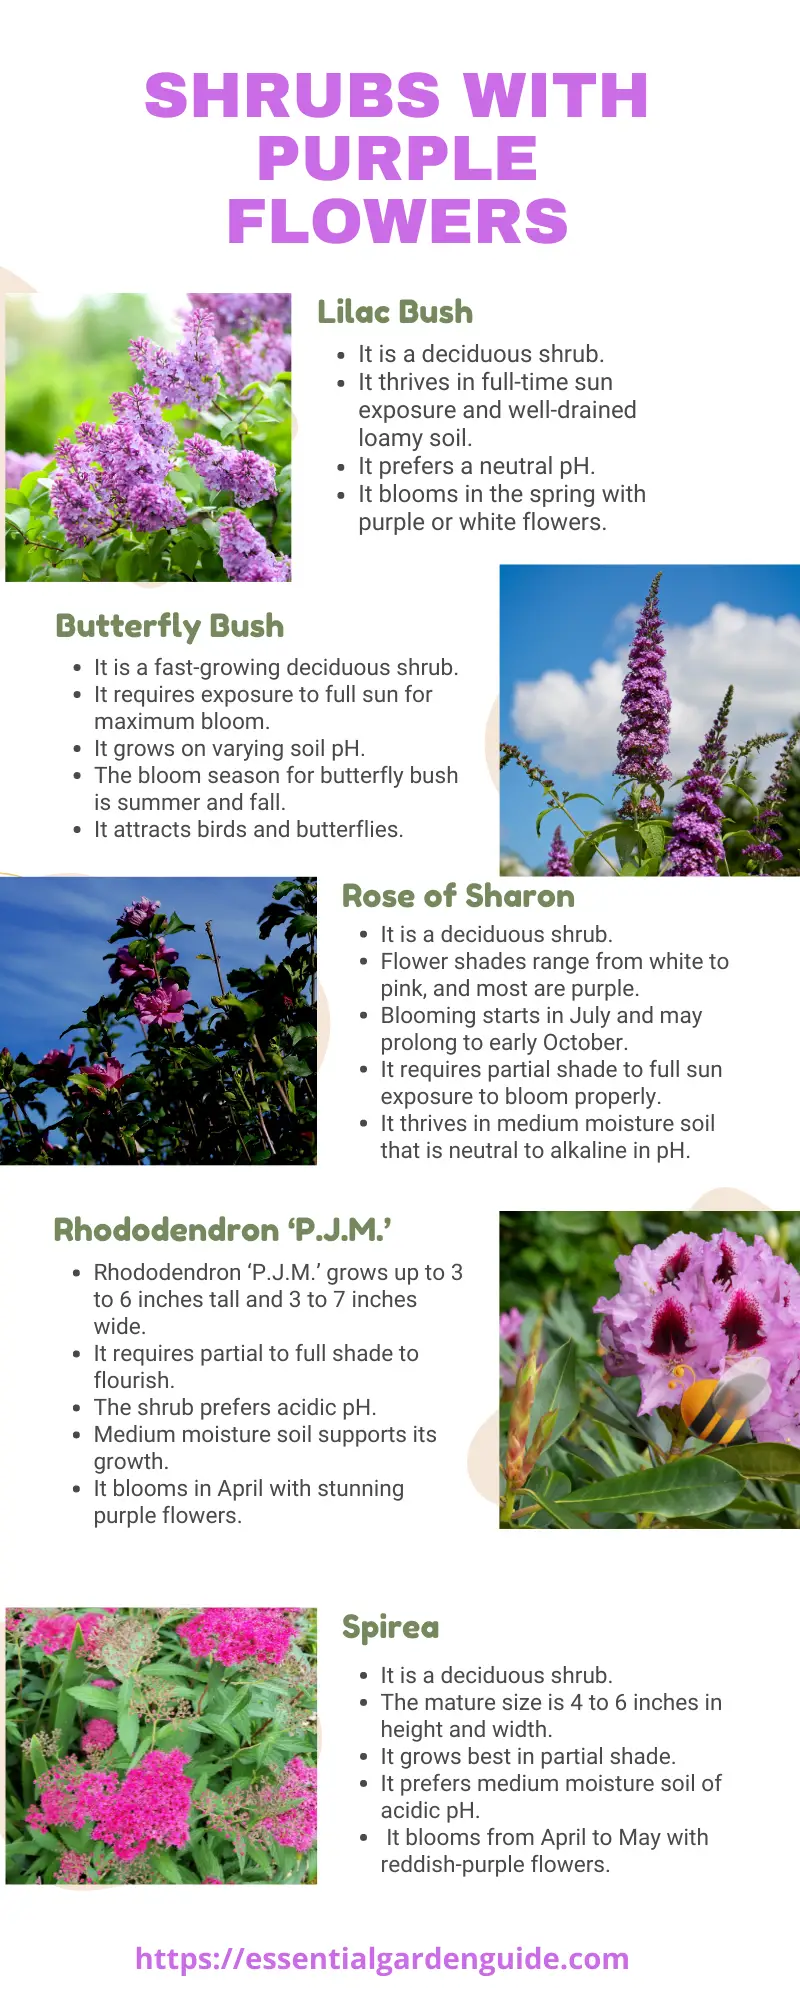 What is the Texas shrub with purple flowers? 5 examples